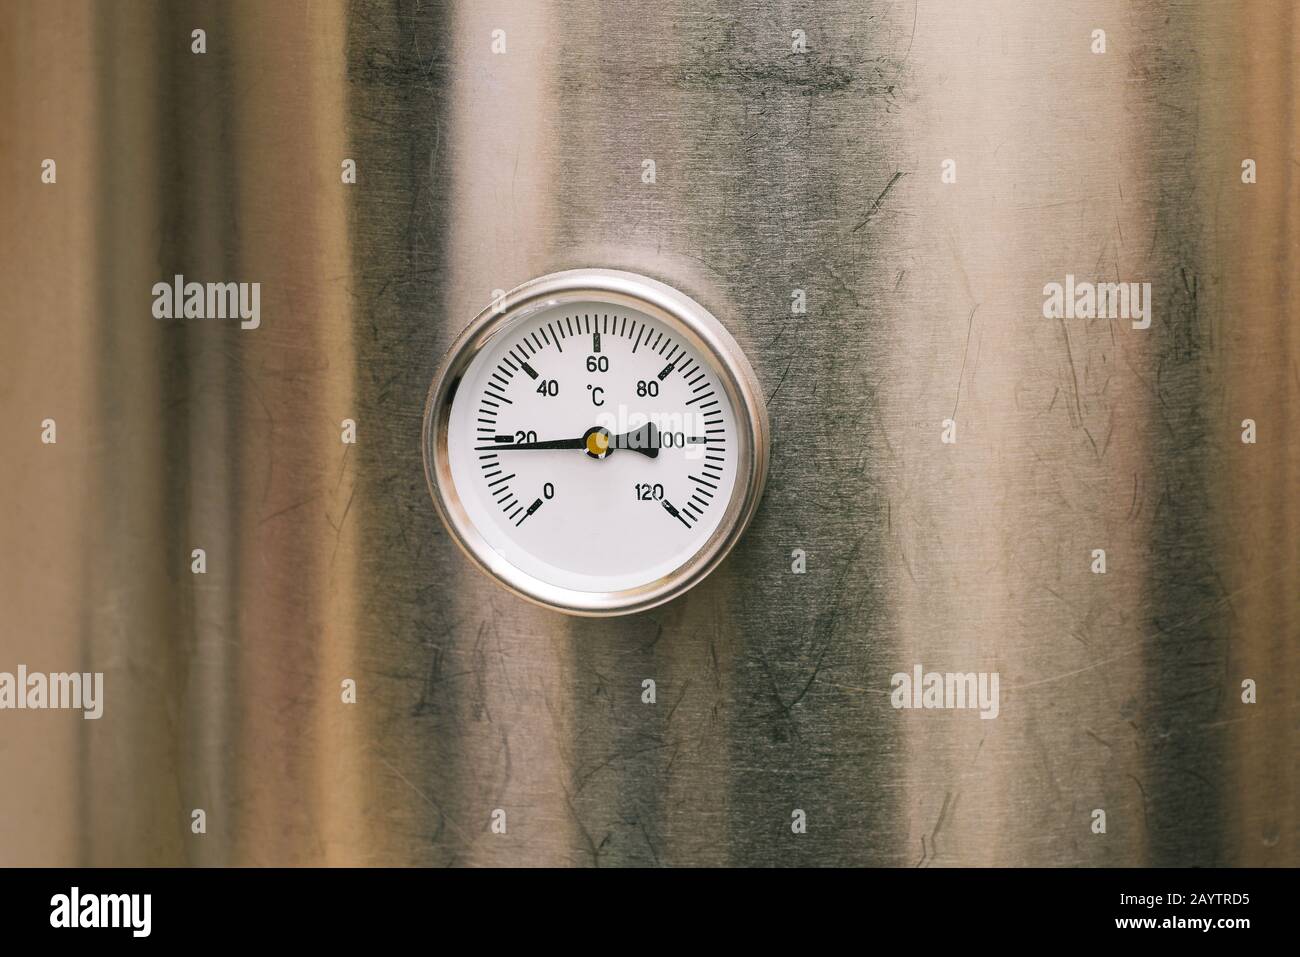 https://c8.alamy.com/comp/2AYTRD5/an-industrial-thermometer-is-mounted-on-a-stainless-steel-boiler-heated-cold-water-temperature-sensor-components-of-heating-equipment-2AYTRD5.jpg